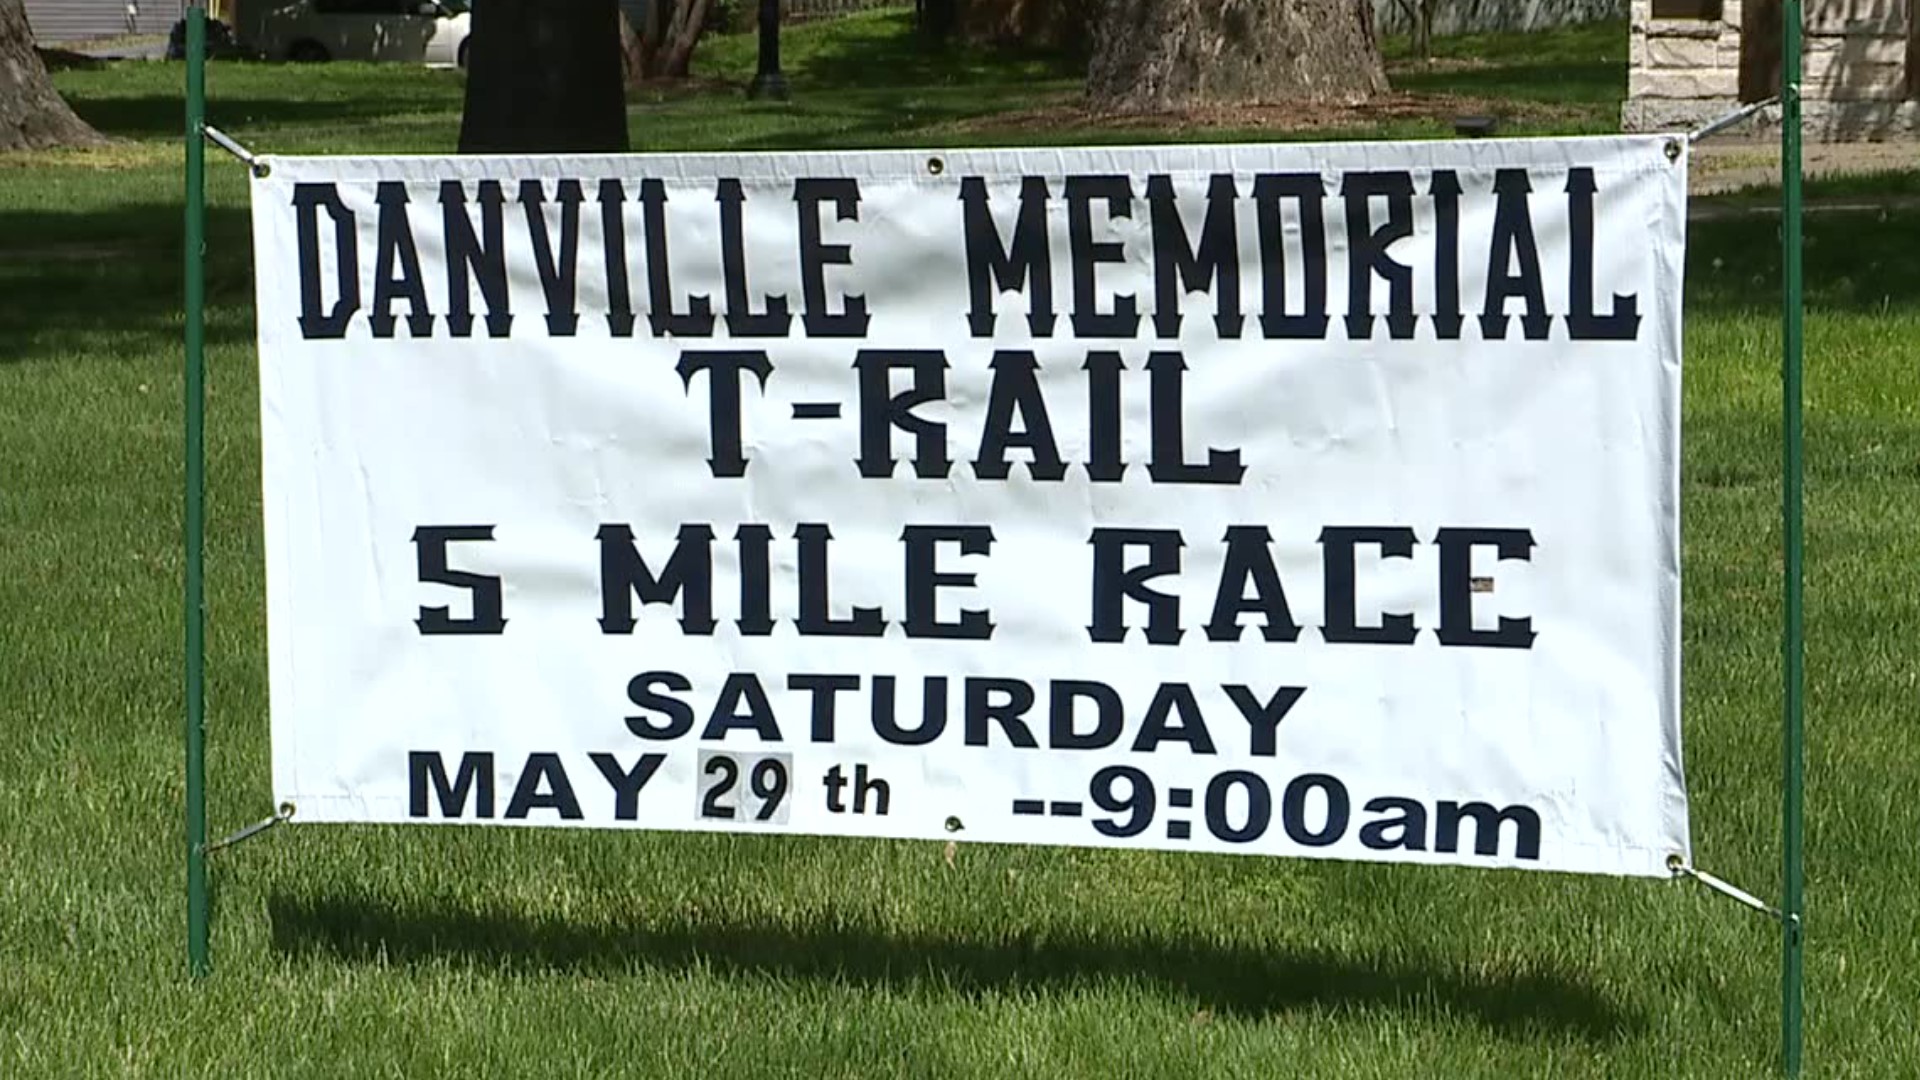 A Memorial Day run that was held for decades in Montour County is back this year with new organizers and a new name.